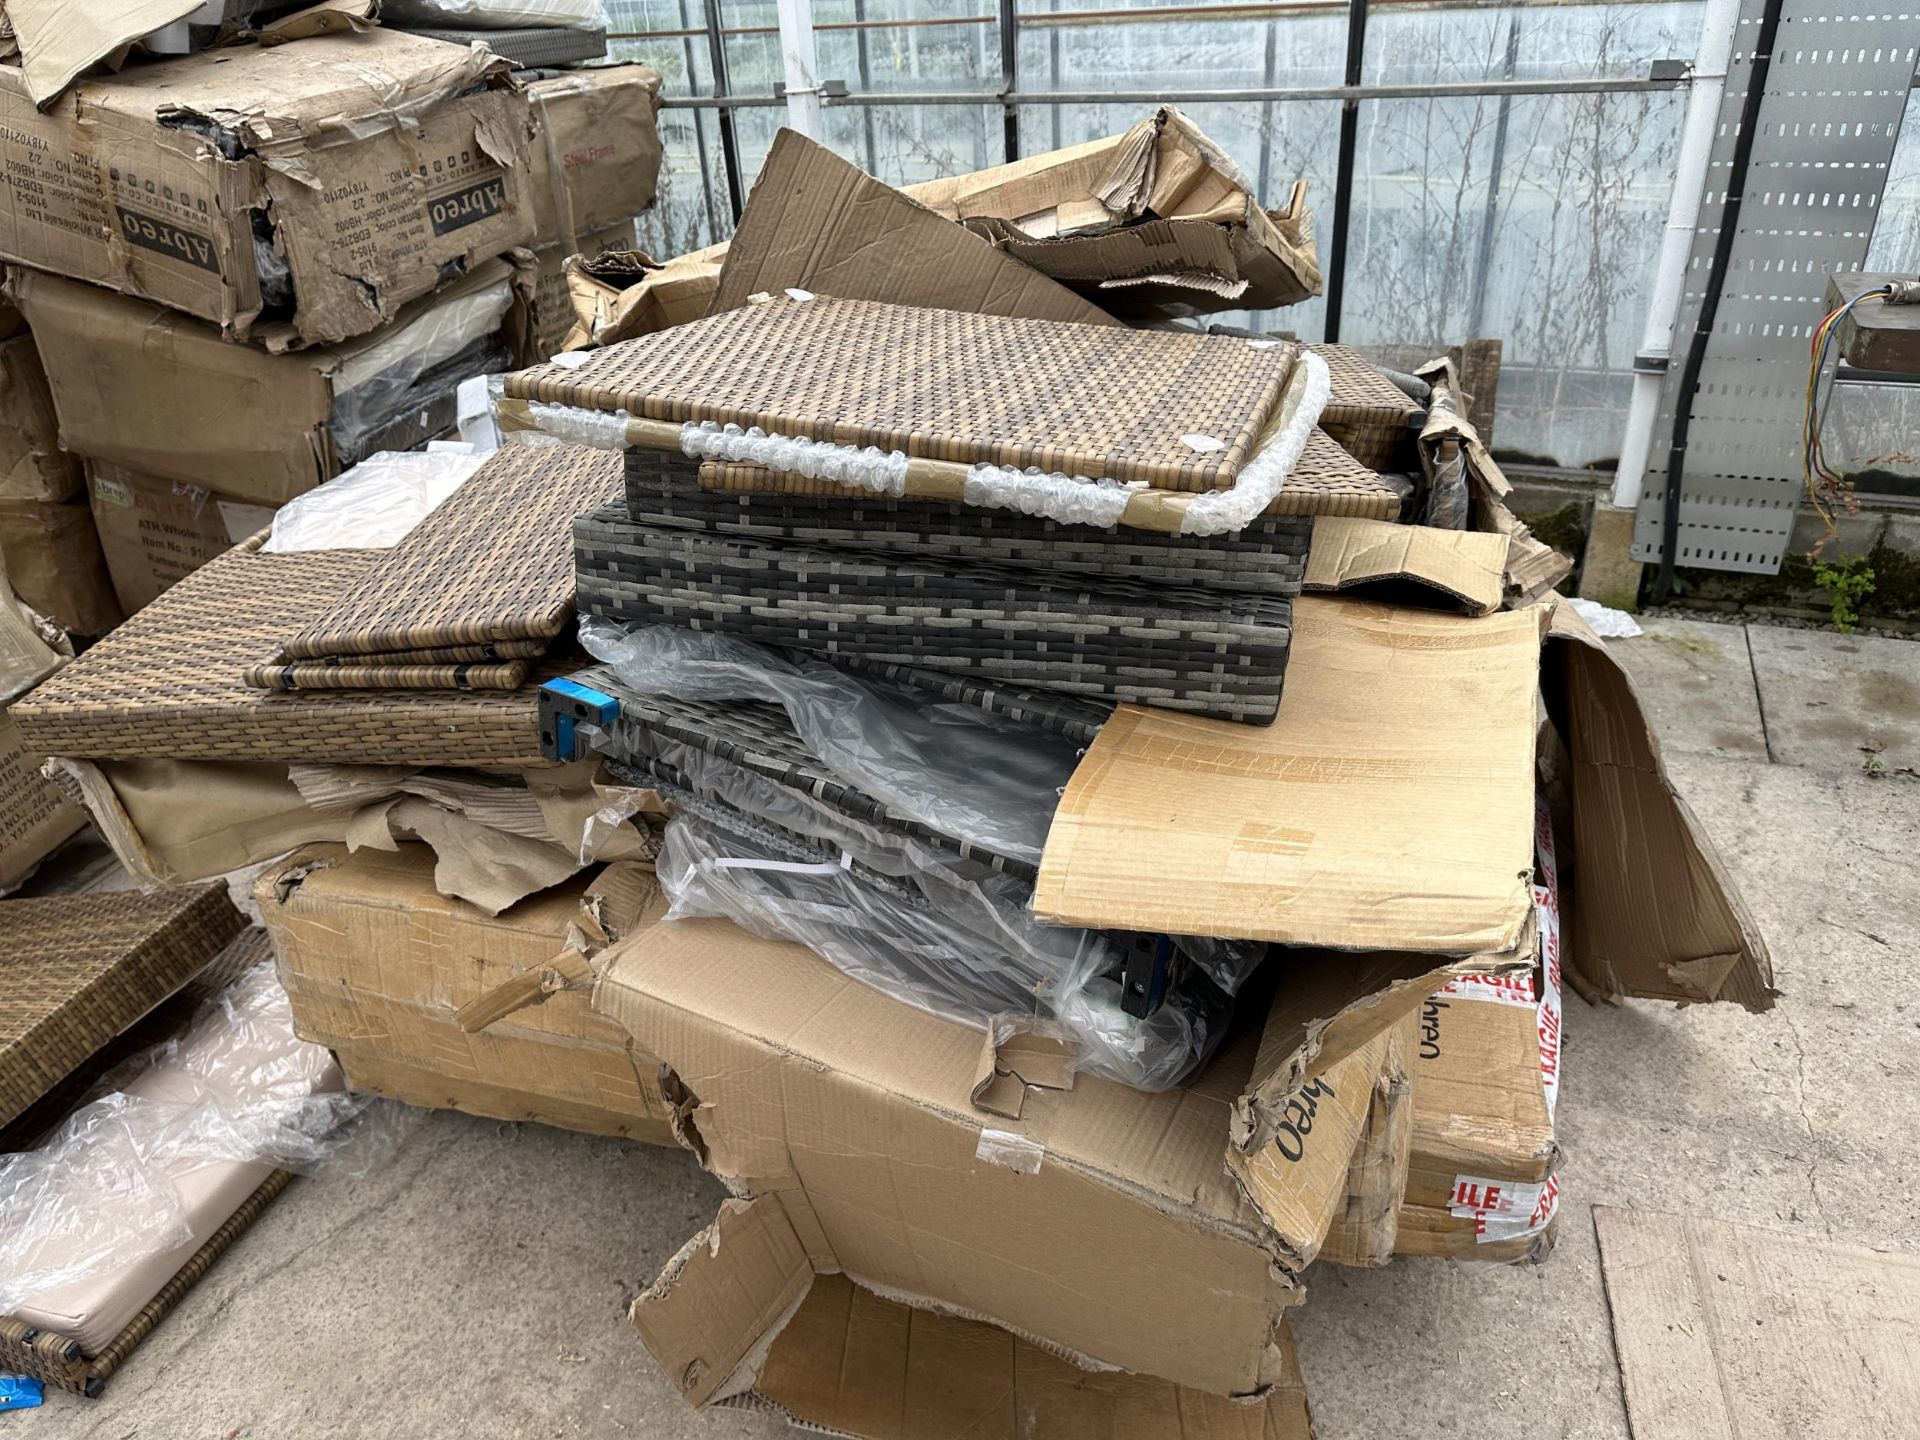 A PALLET OF BOXED GARDEN FURNITURE - BELIEVED UNUSED